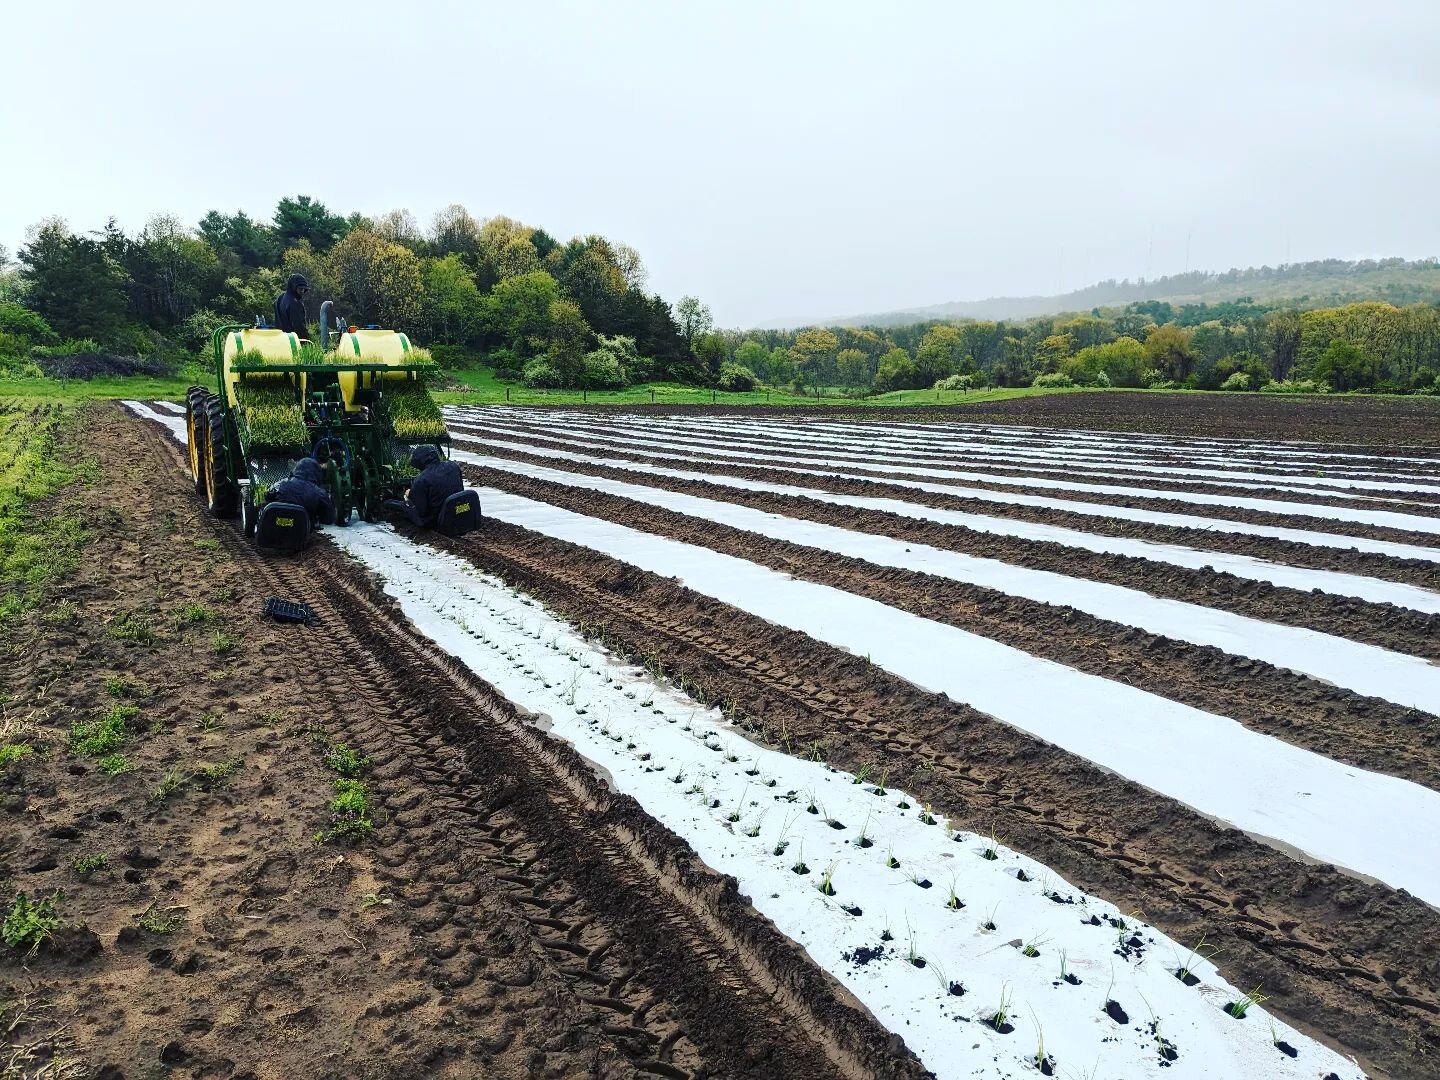 Planting some onions. 120,000 onions!